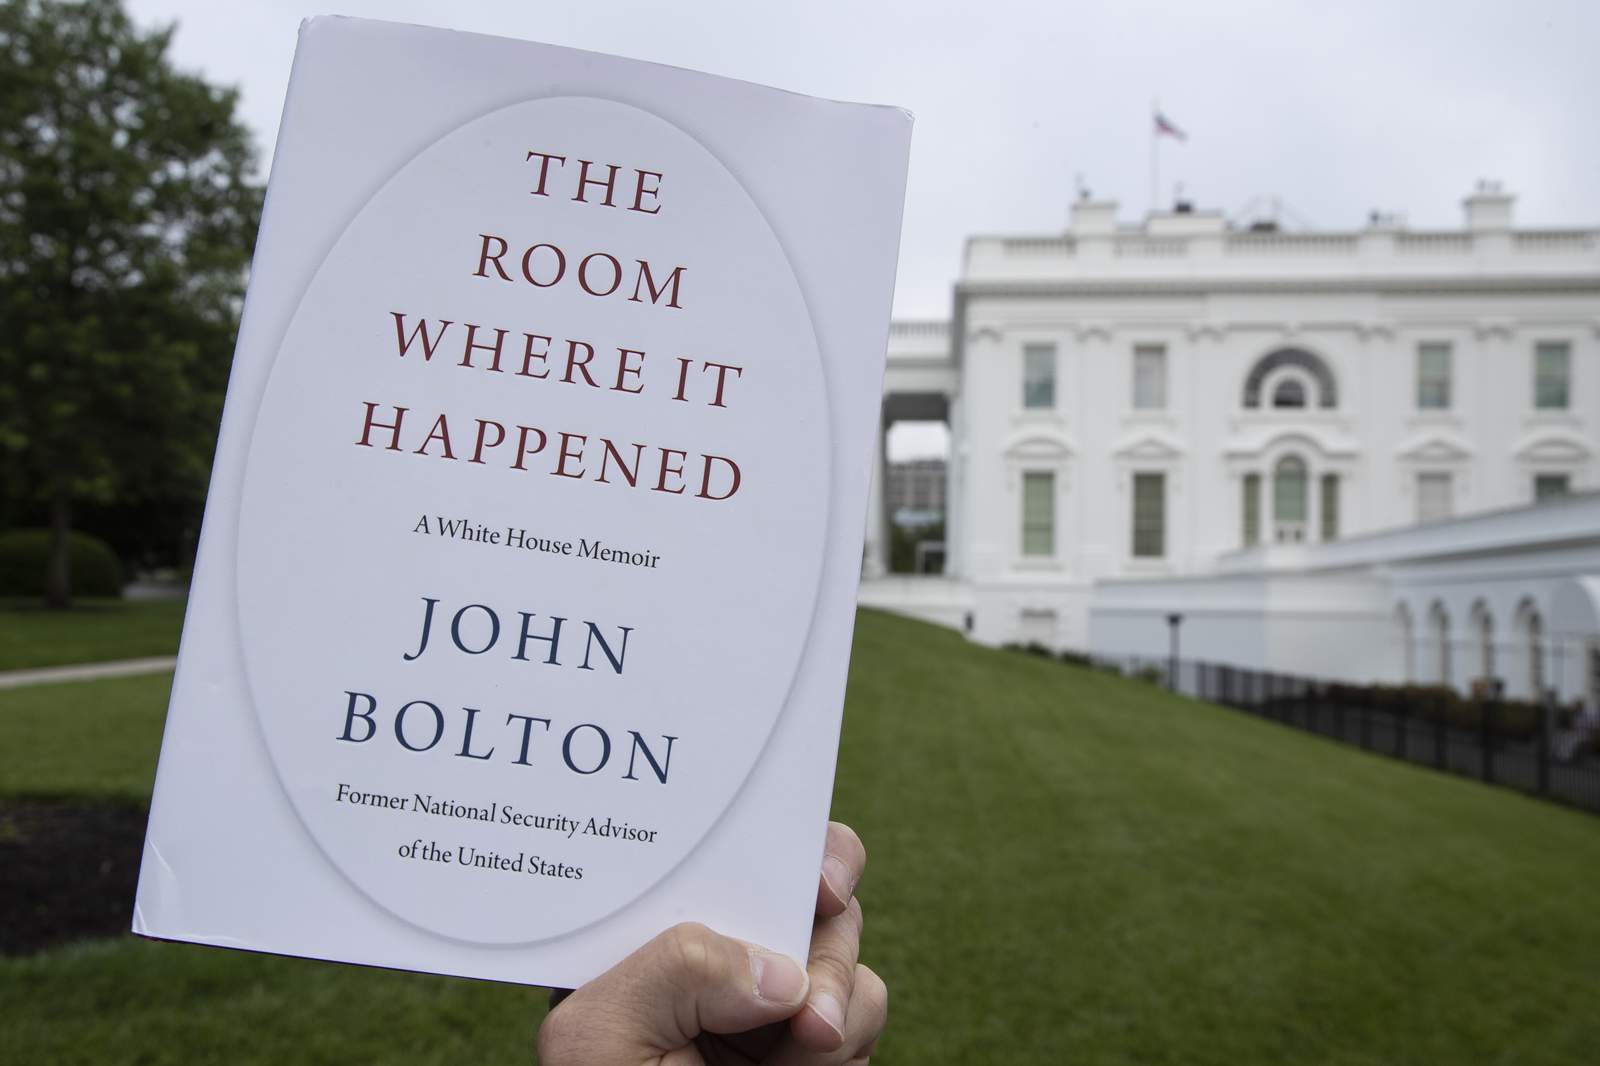 Pirated editions of John Bolton memoir have appeared online